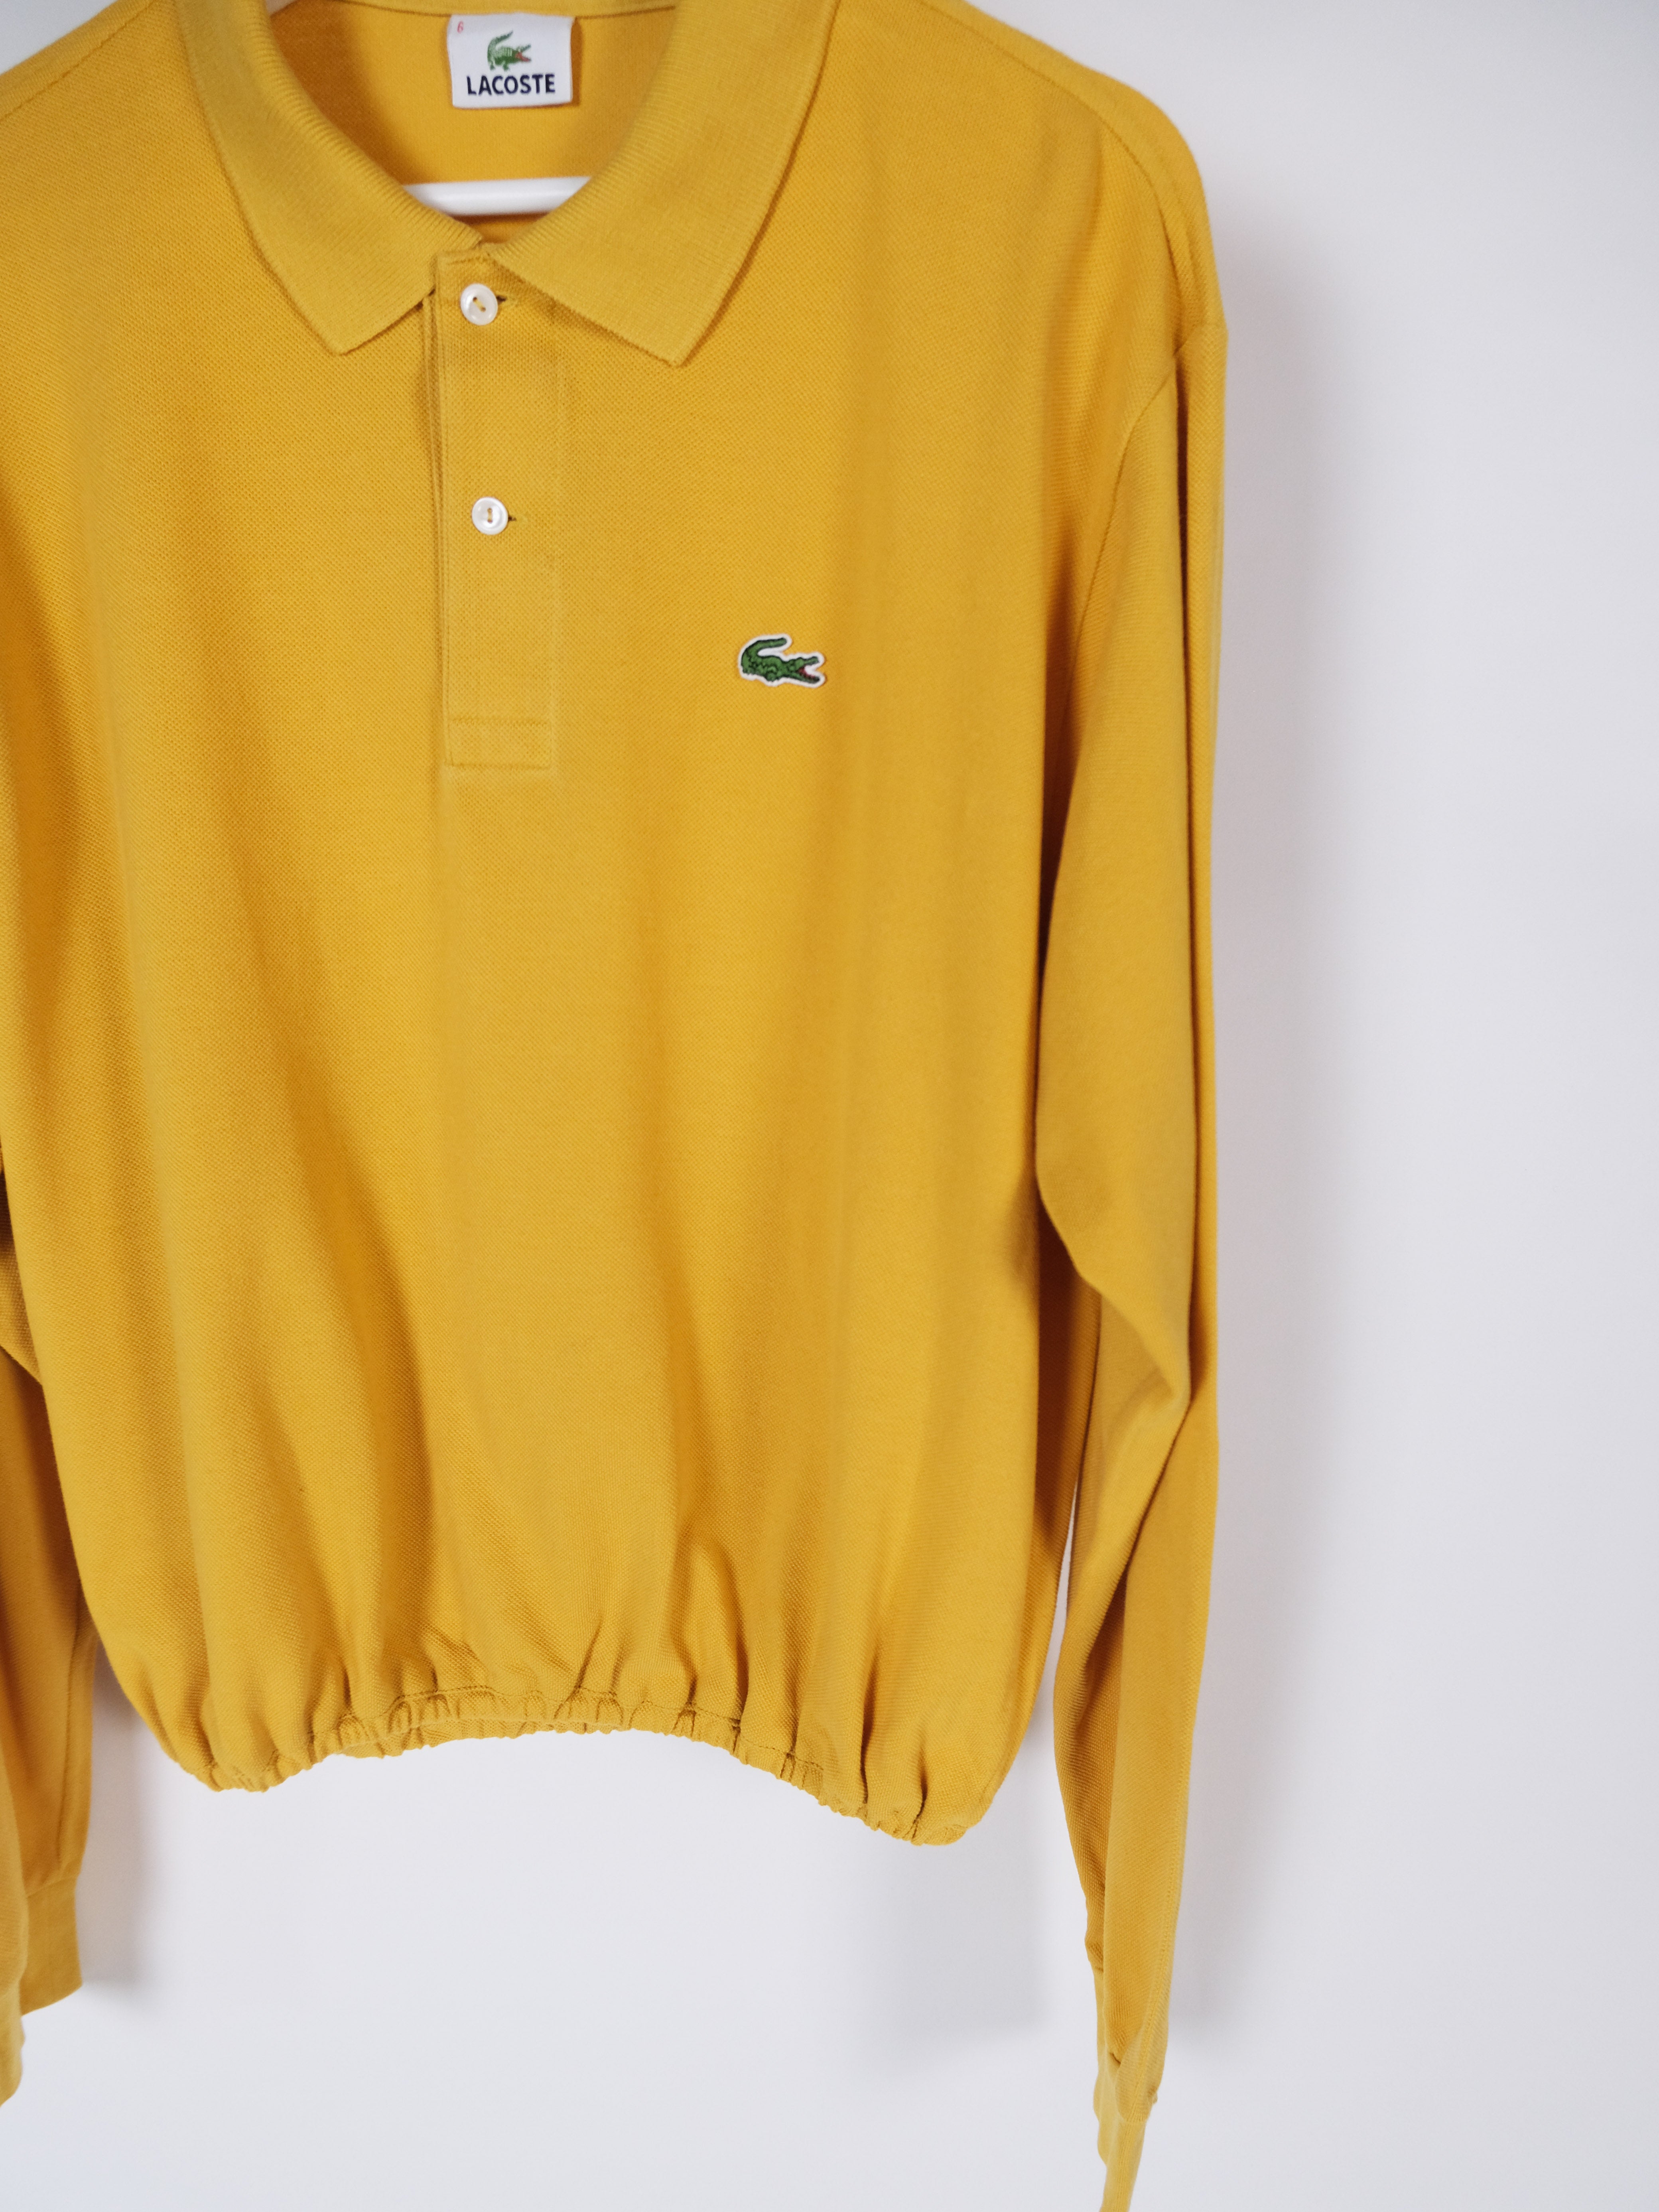 Lacoste polo cropped yellow scrunchie set